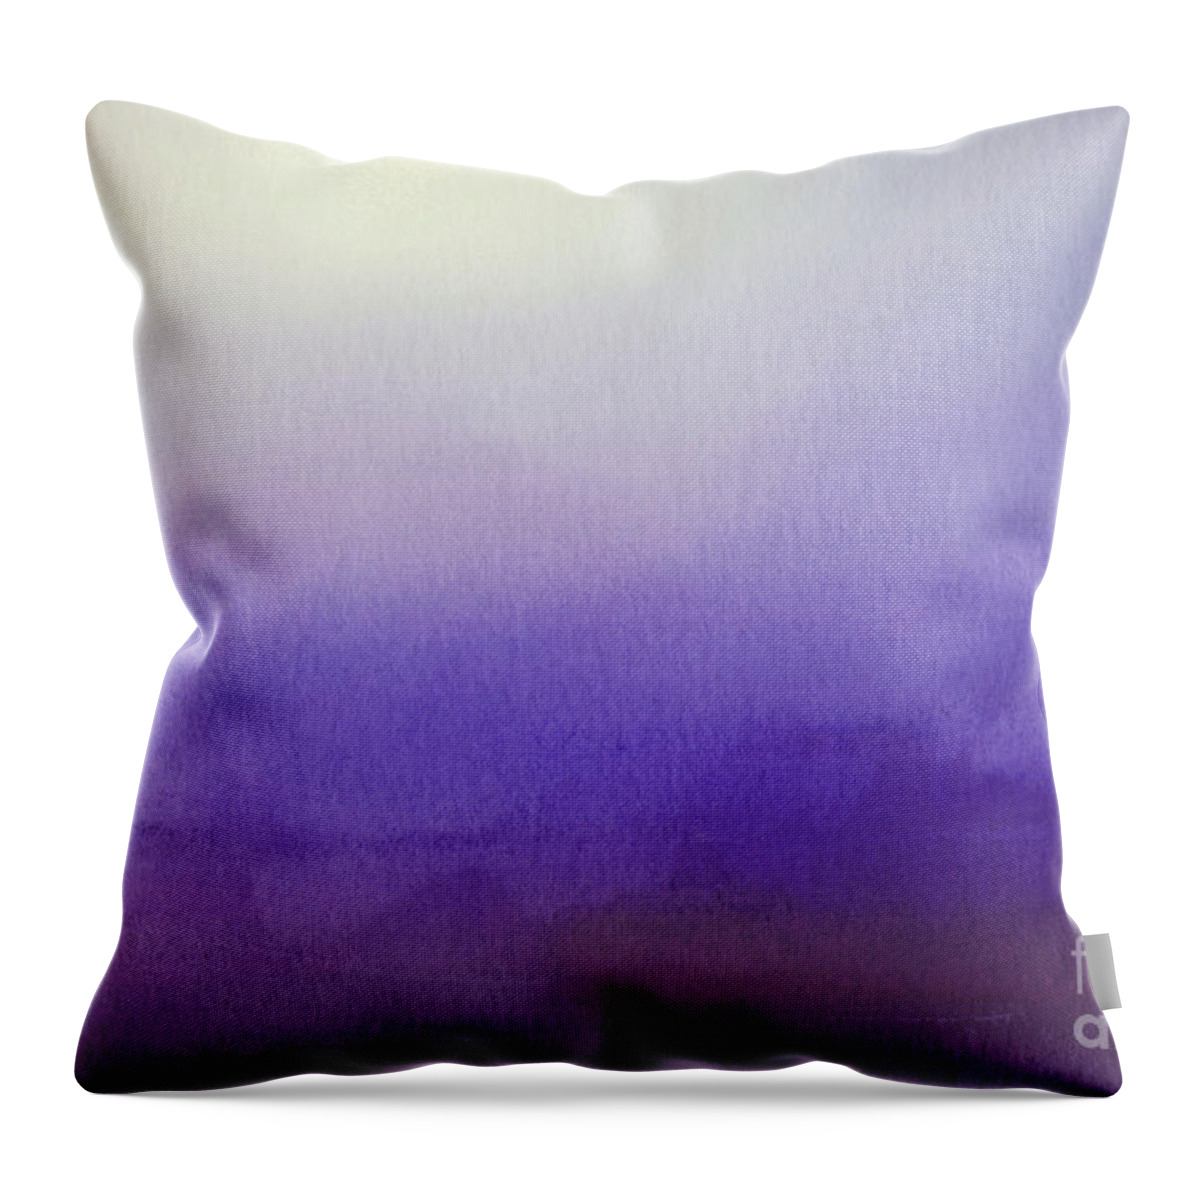 Purple Throw Pillow featuring the painting Abstract Watercolor Blend Dark - Light Purple and White Paper Texture by PIPA Fine Art - Simply Solid